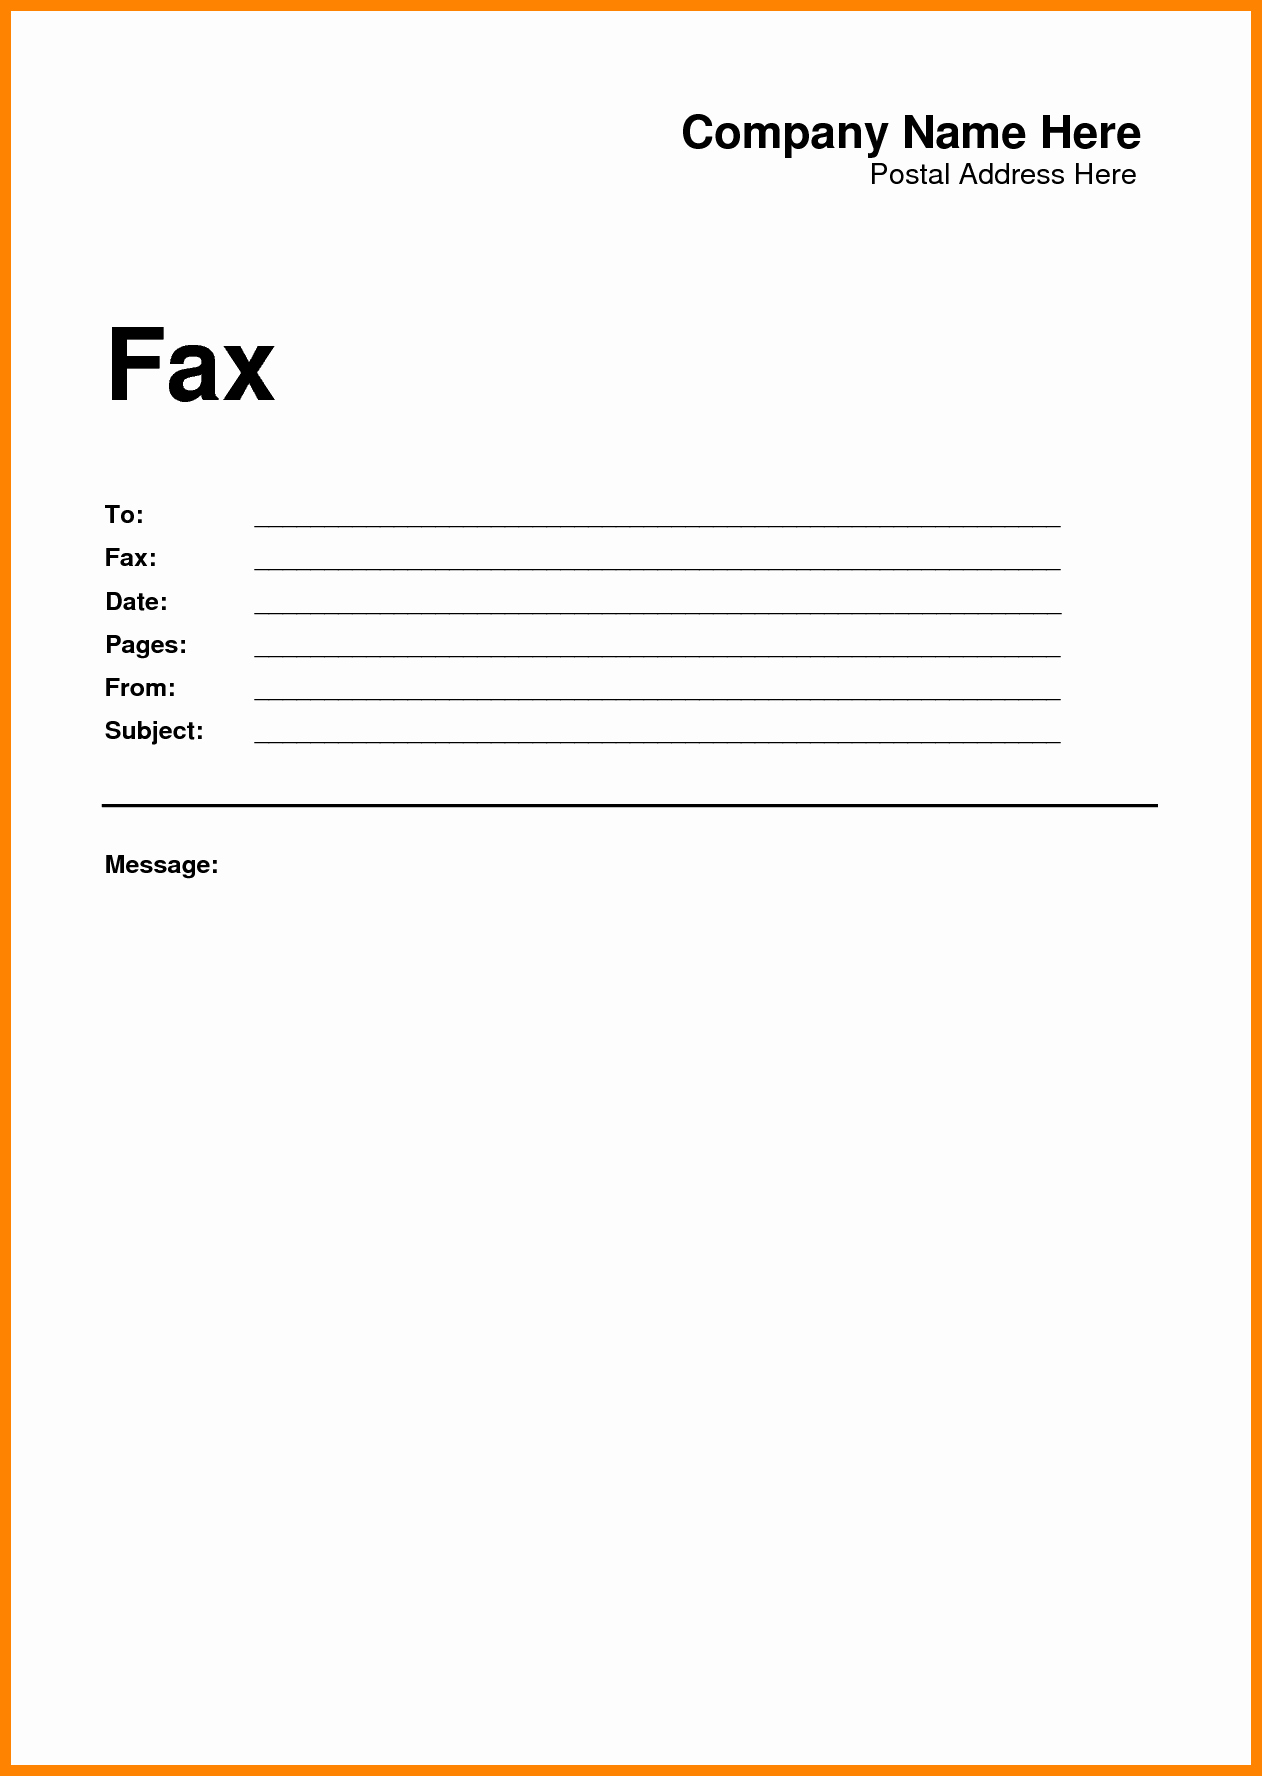 Fax Cover Sheet format Awesome 6 Free Fax Cover Sheet